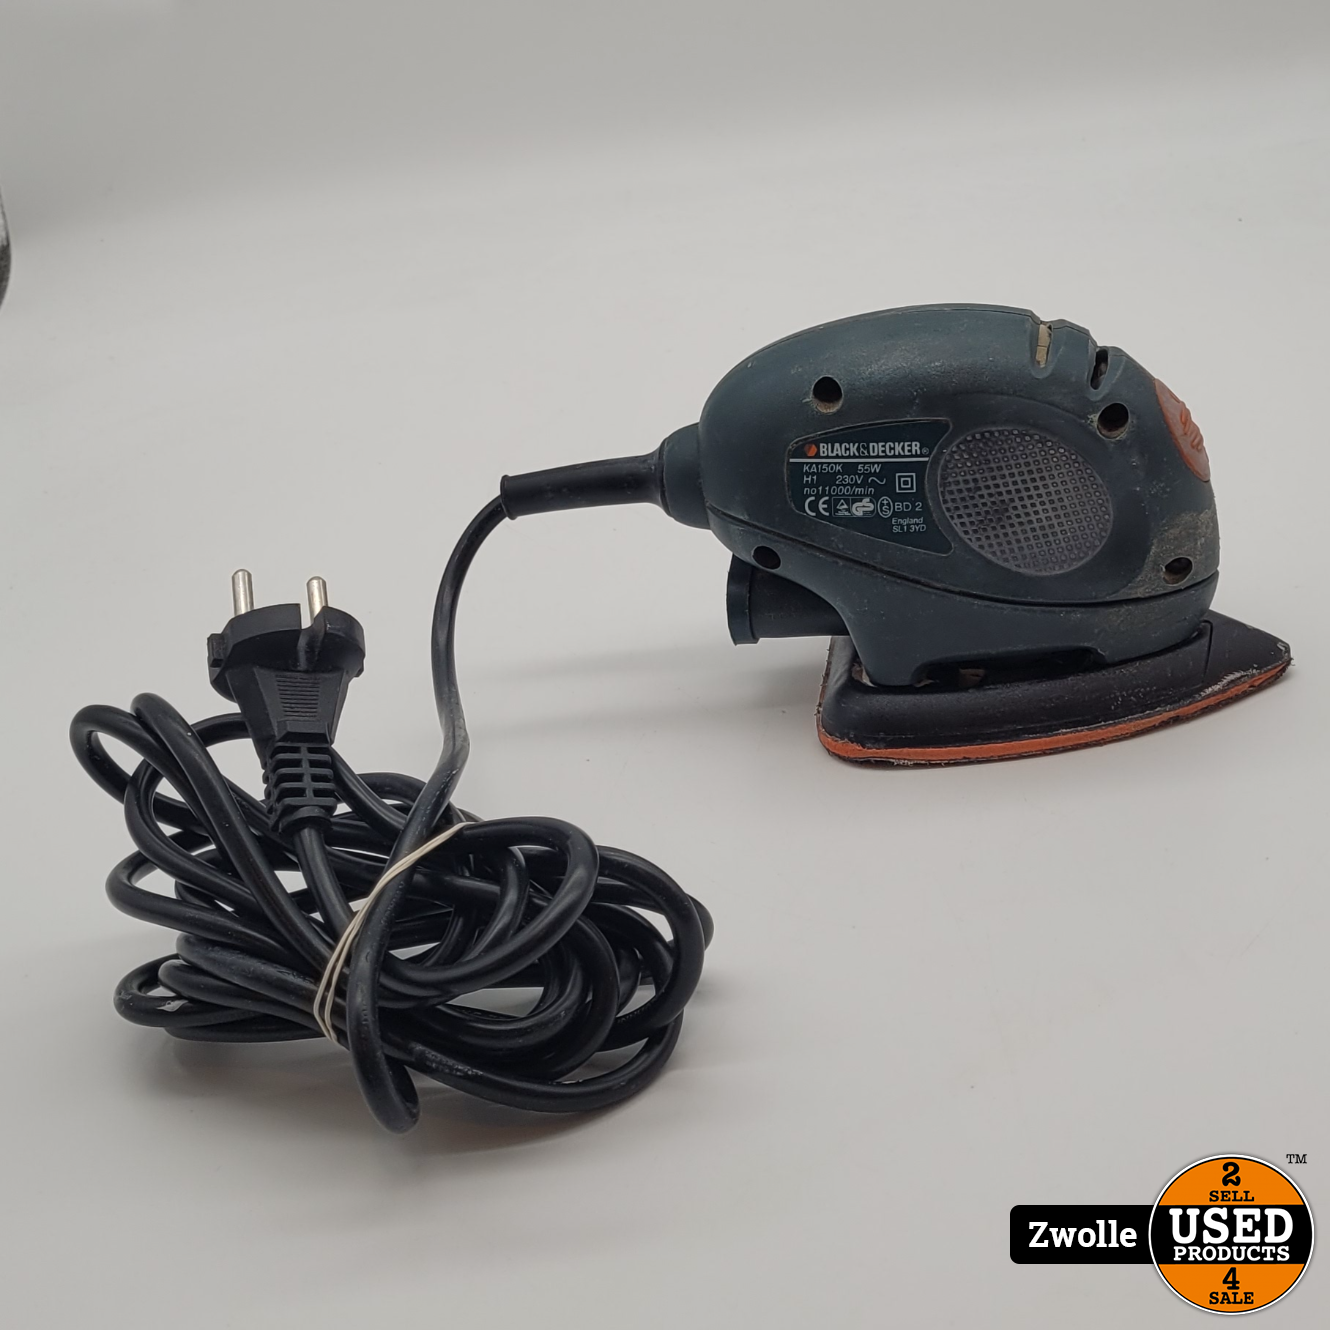 Black &amp; Decker Mouse schuurmachine KA150K Used Products Zwolle